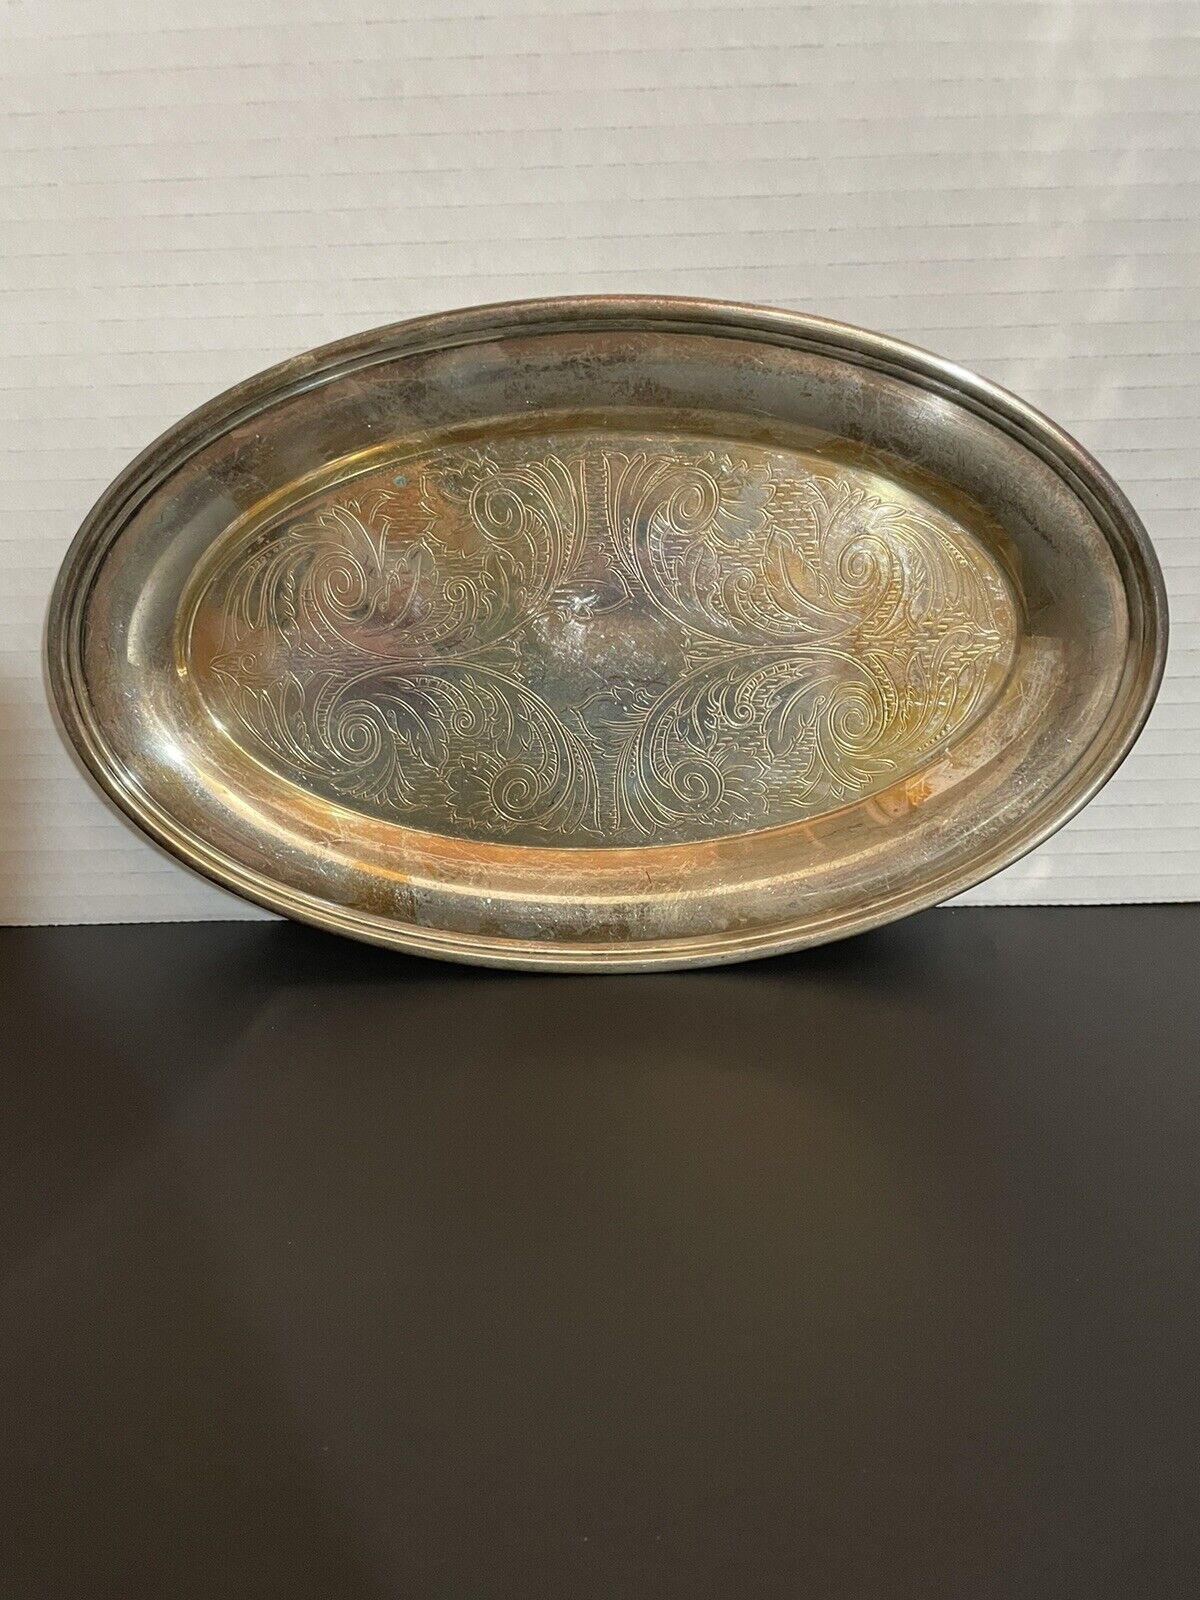 Vintage Empire Crafts Silverplate Oval Tray